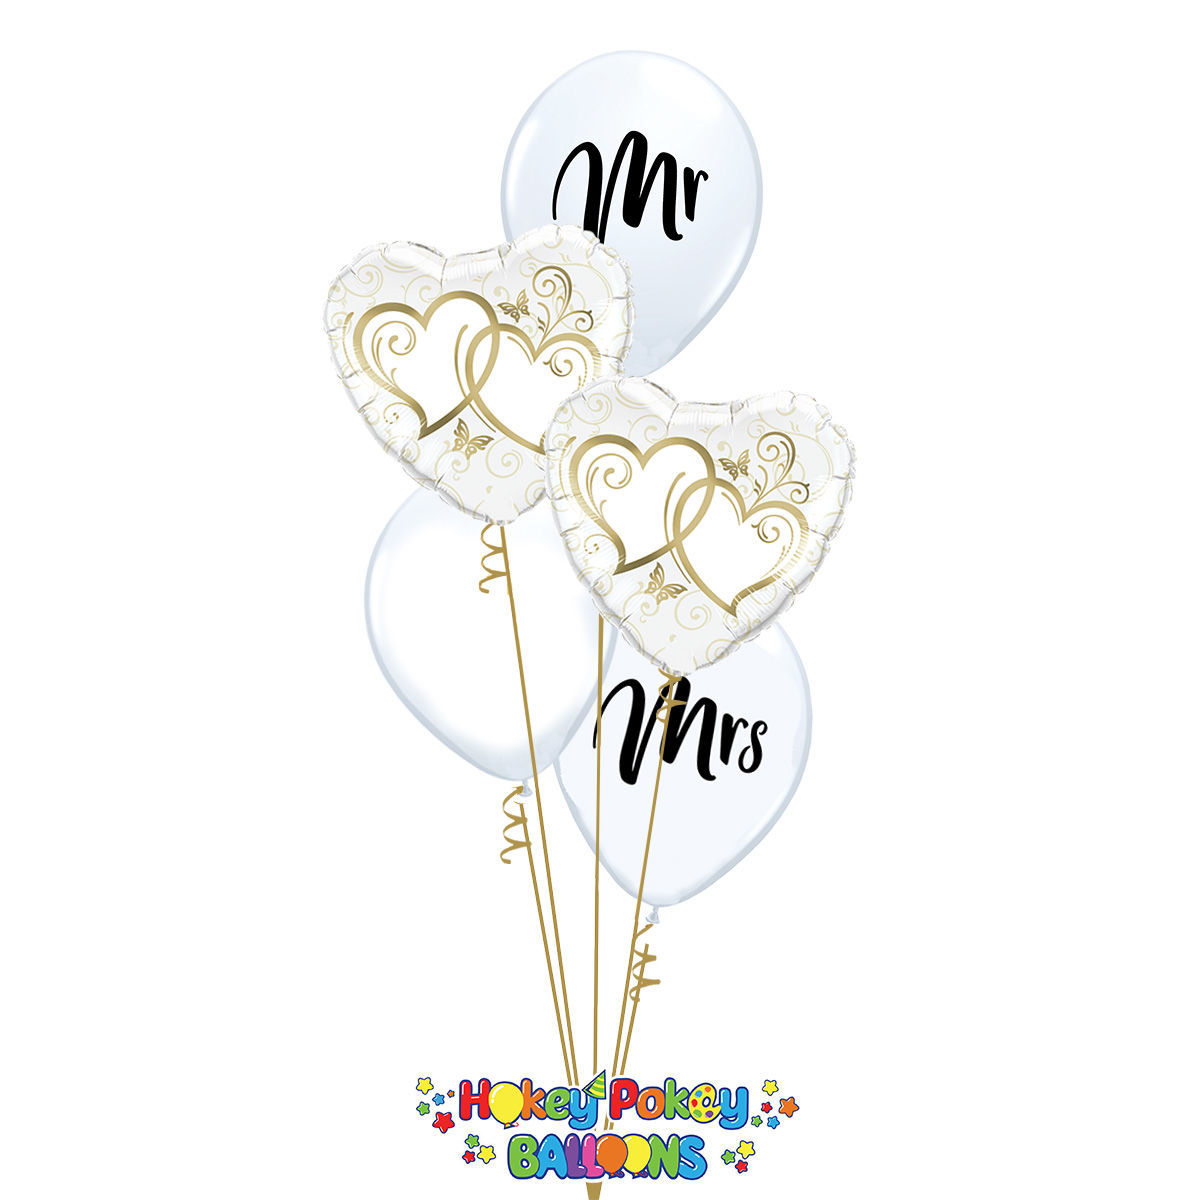 Picture of Couple of Entwined Gold Hearts - Balloon Bouquet of 5